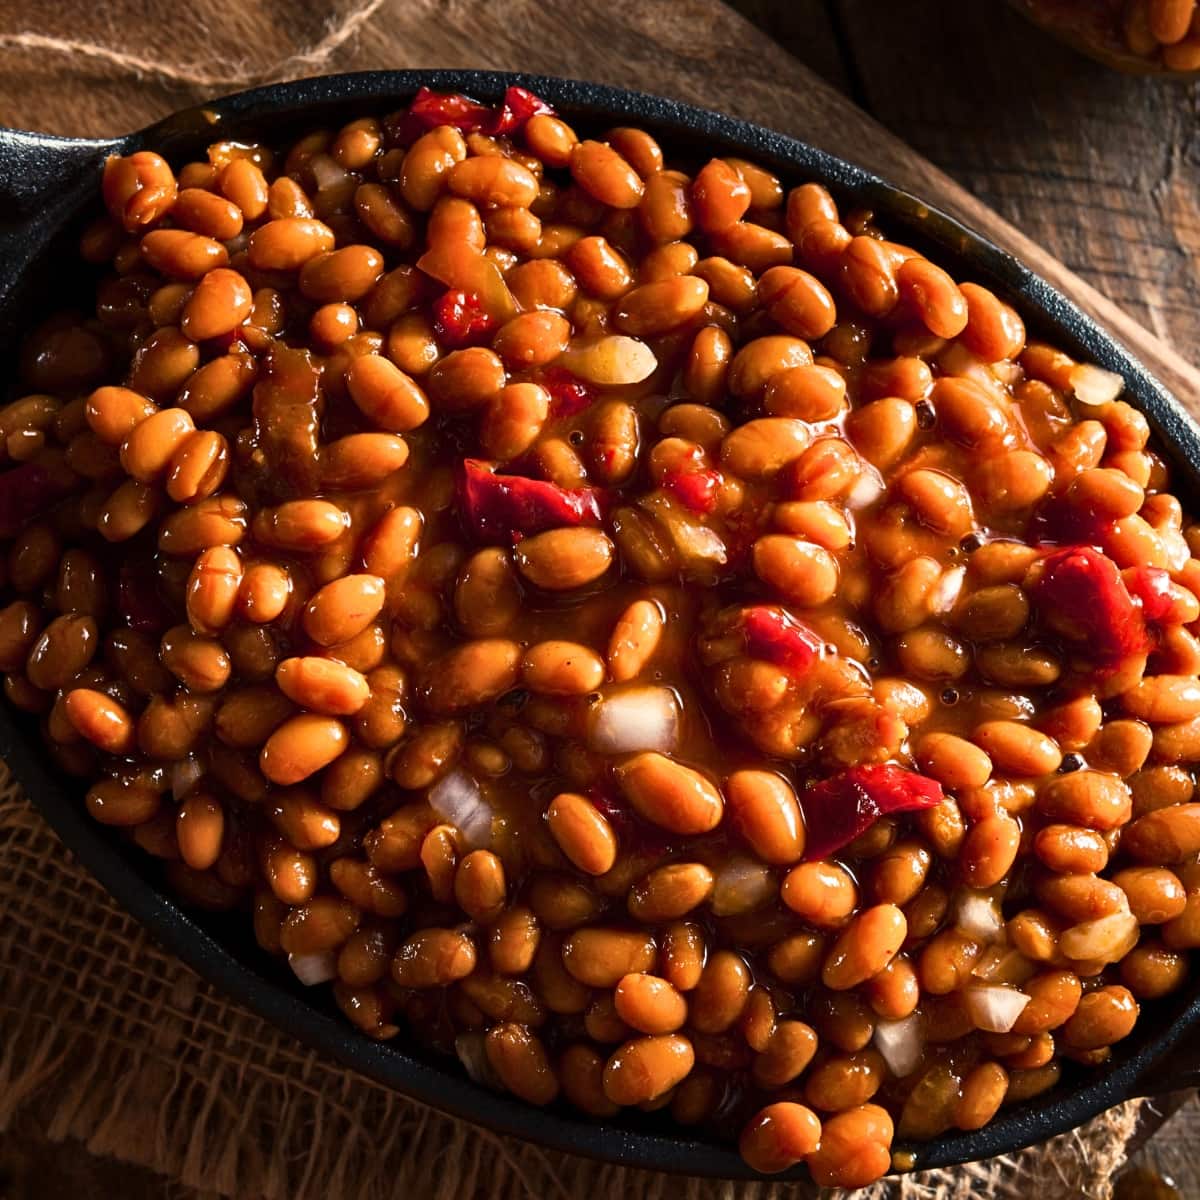 Grandma Brown's Baked Beans With Bacon
